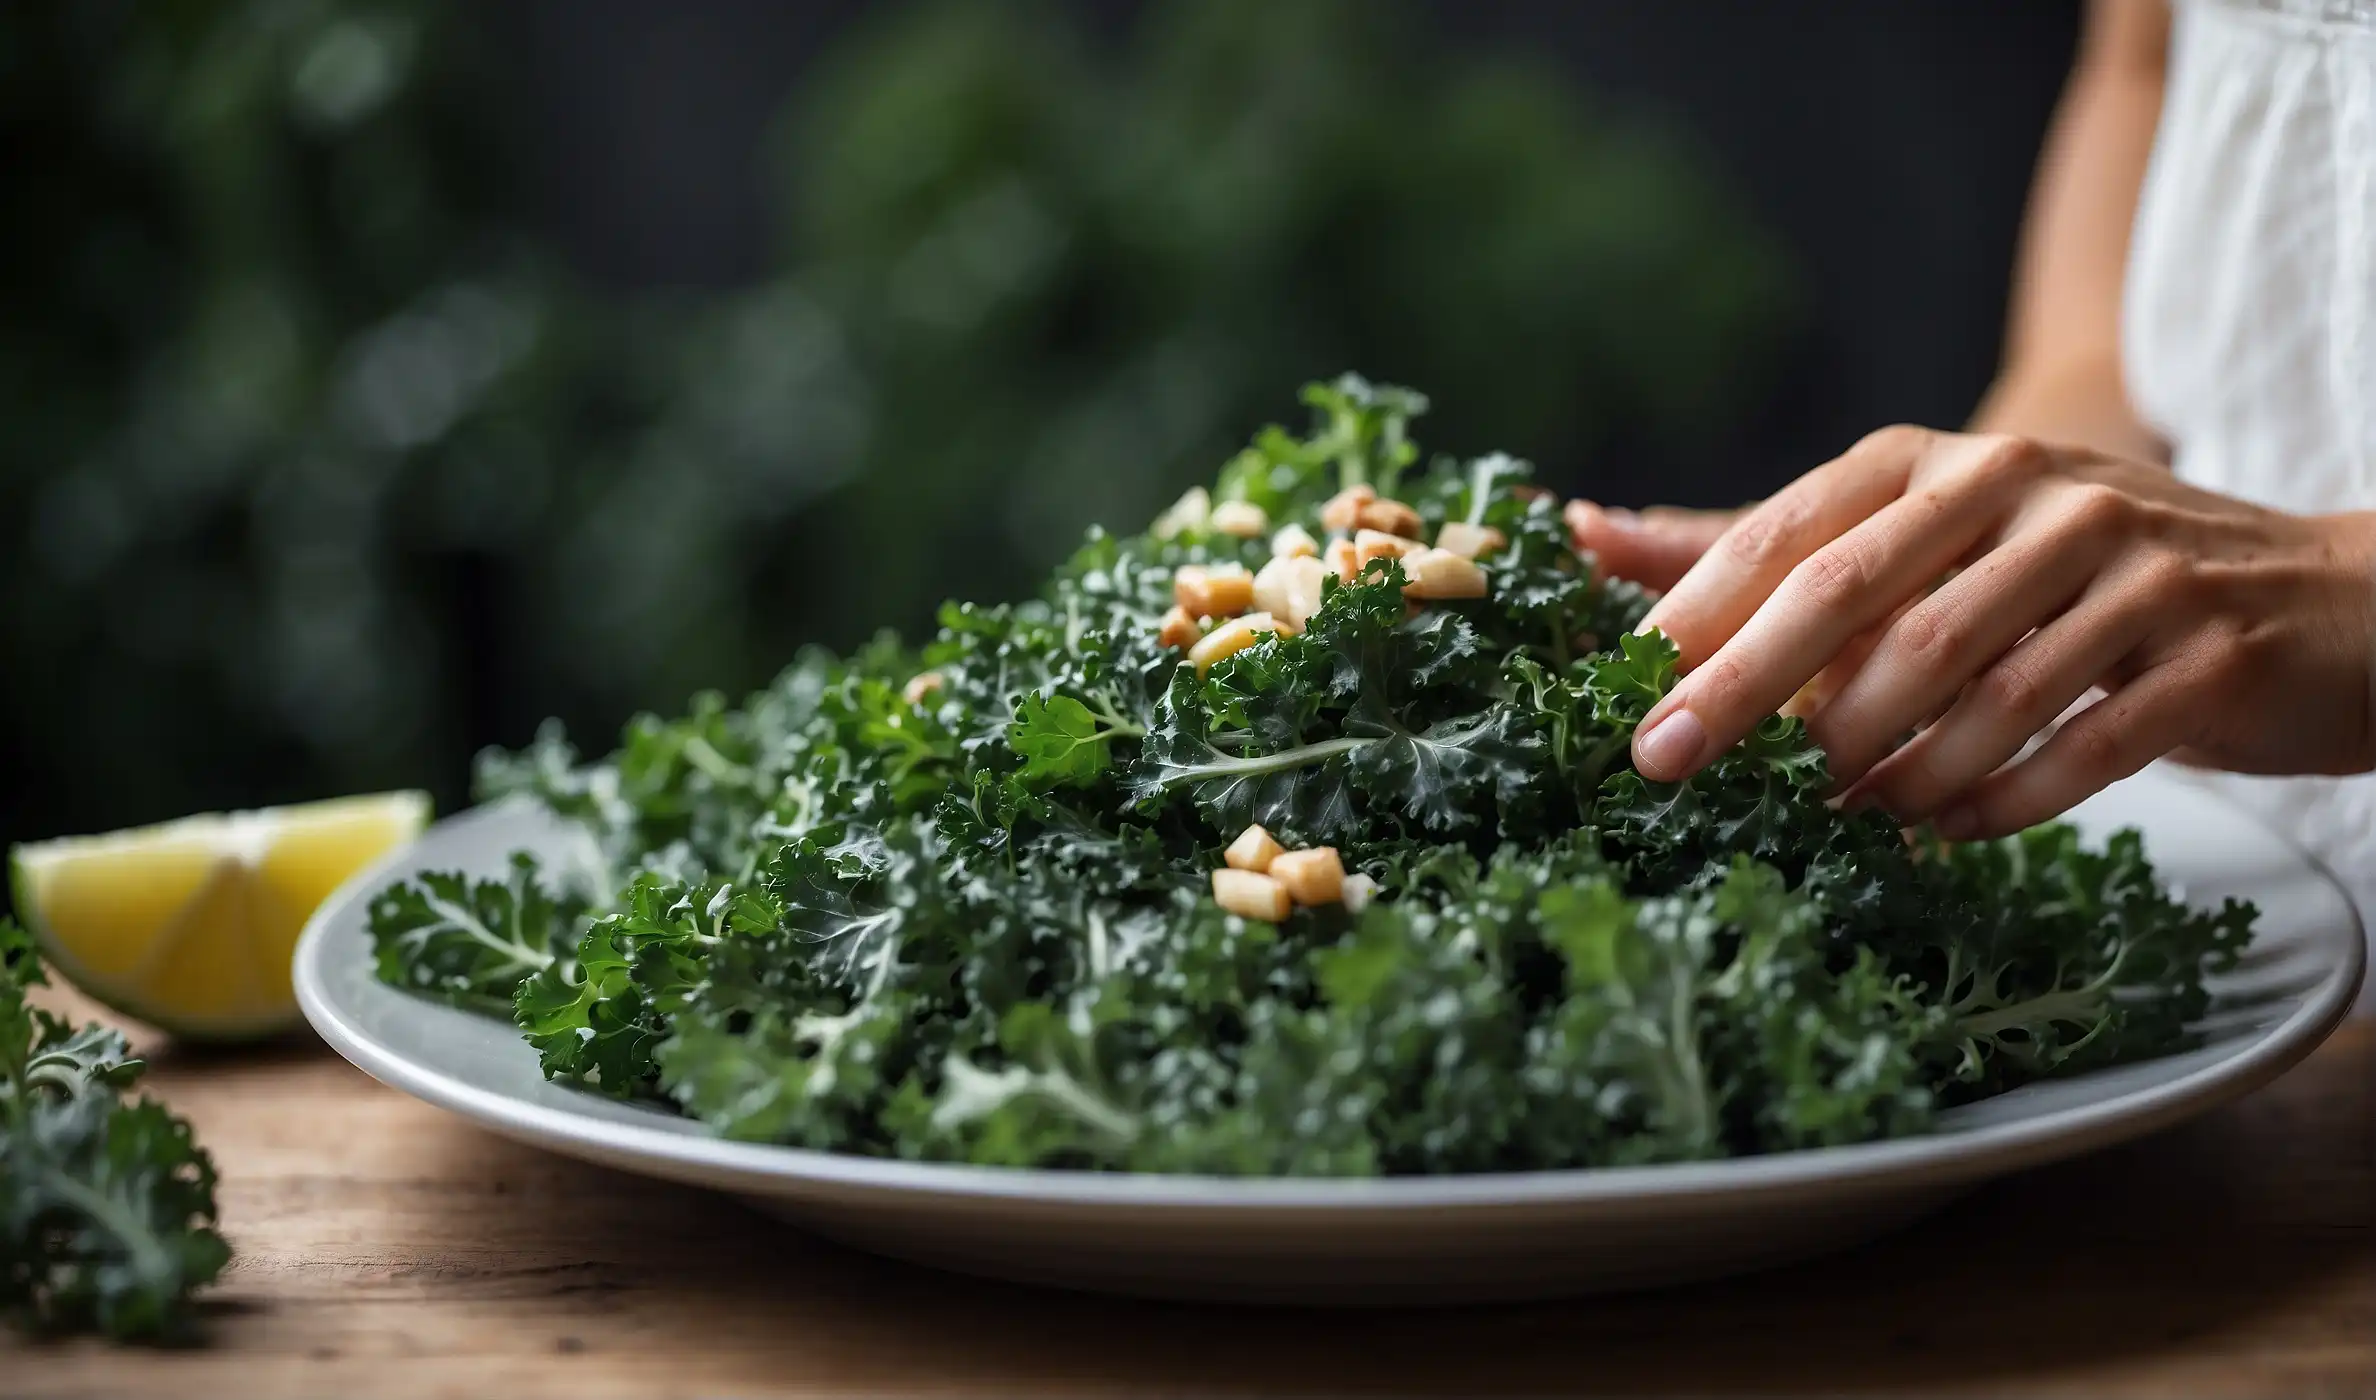 A plate of kale salad